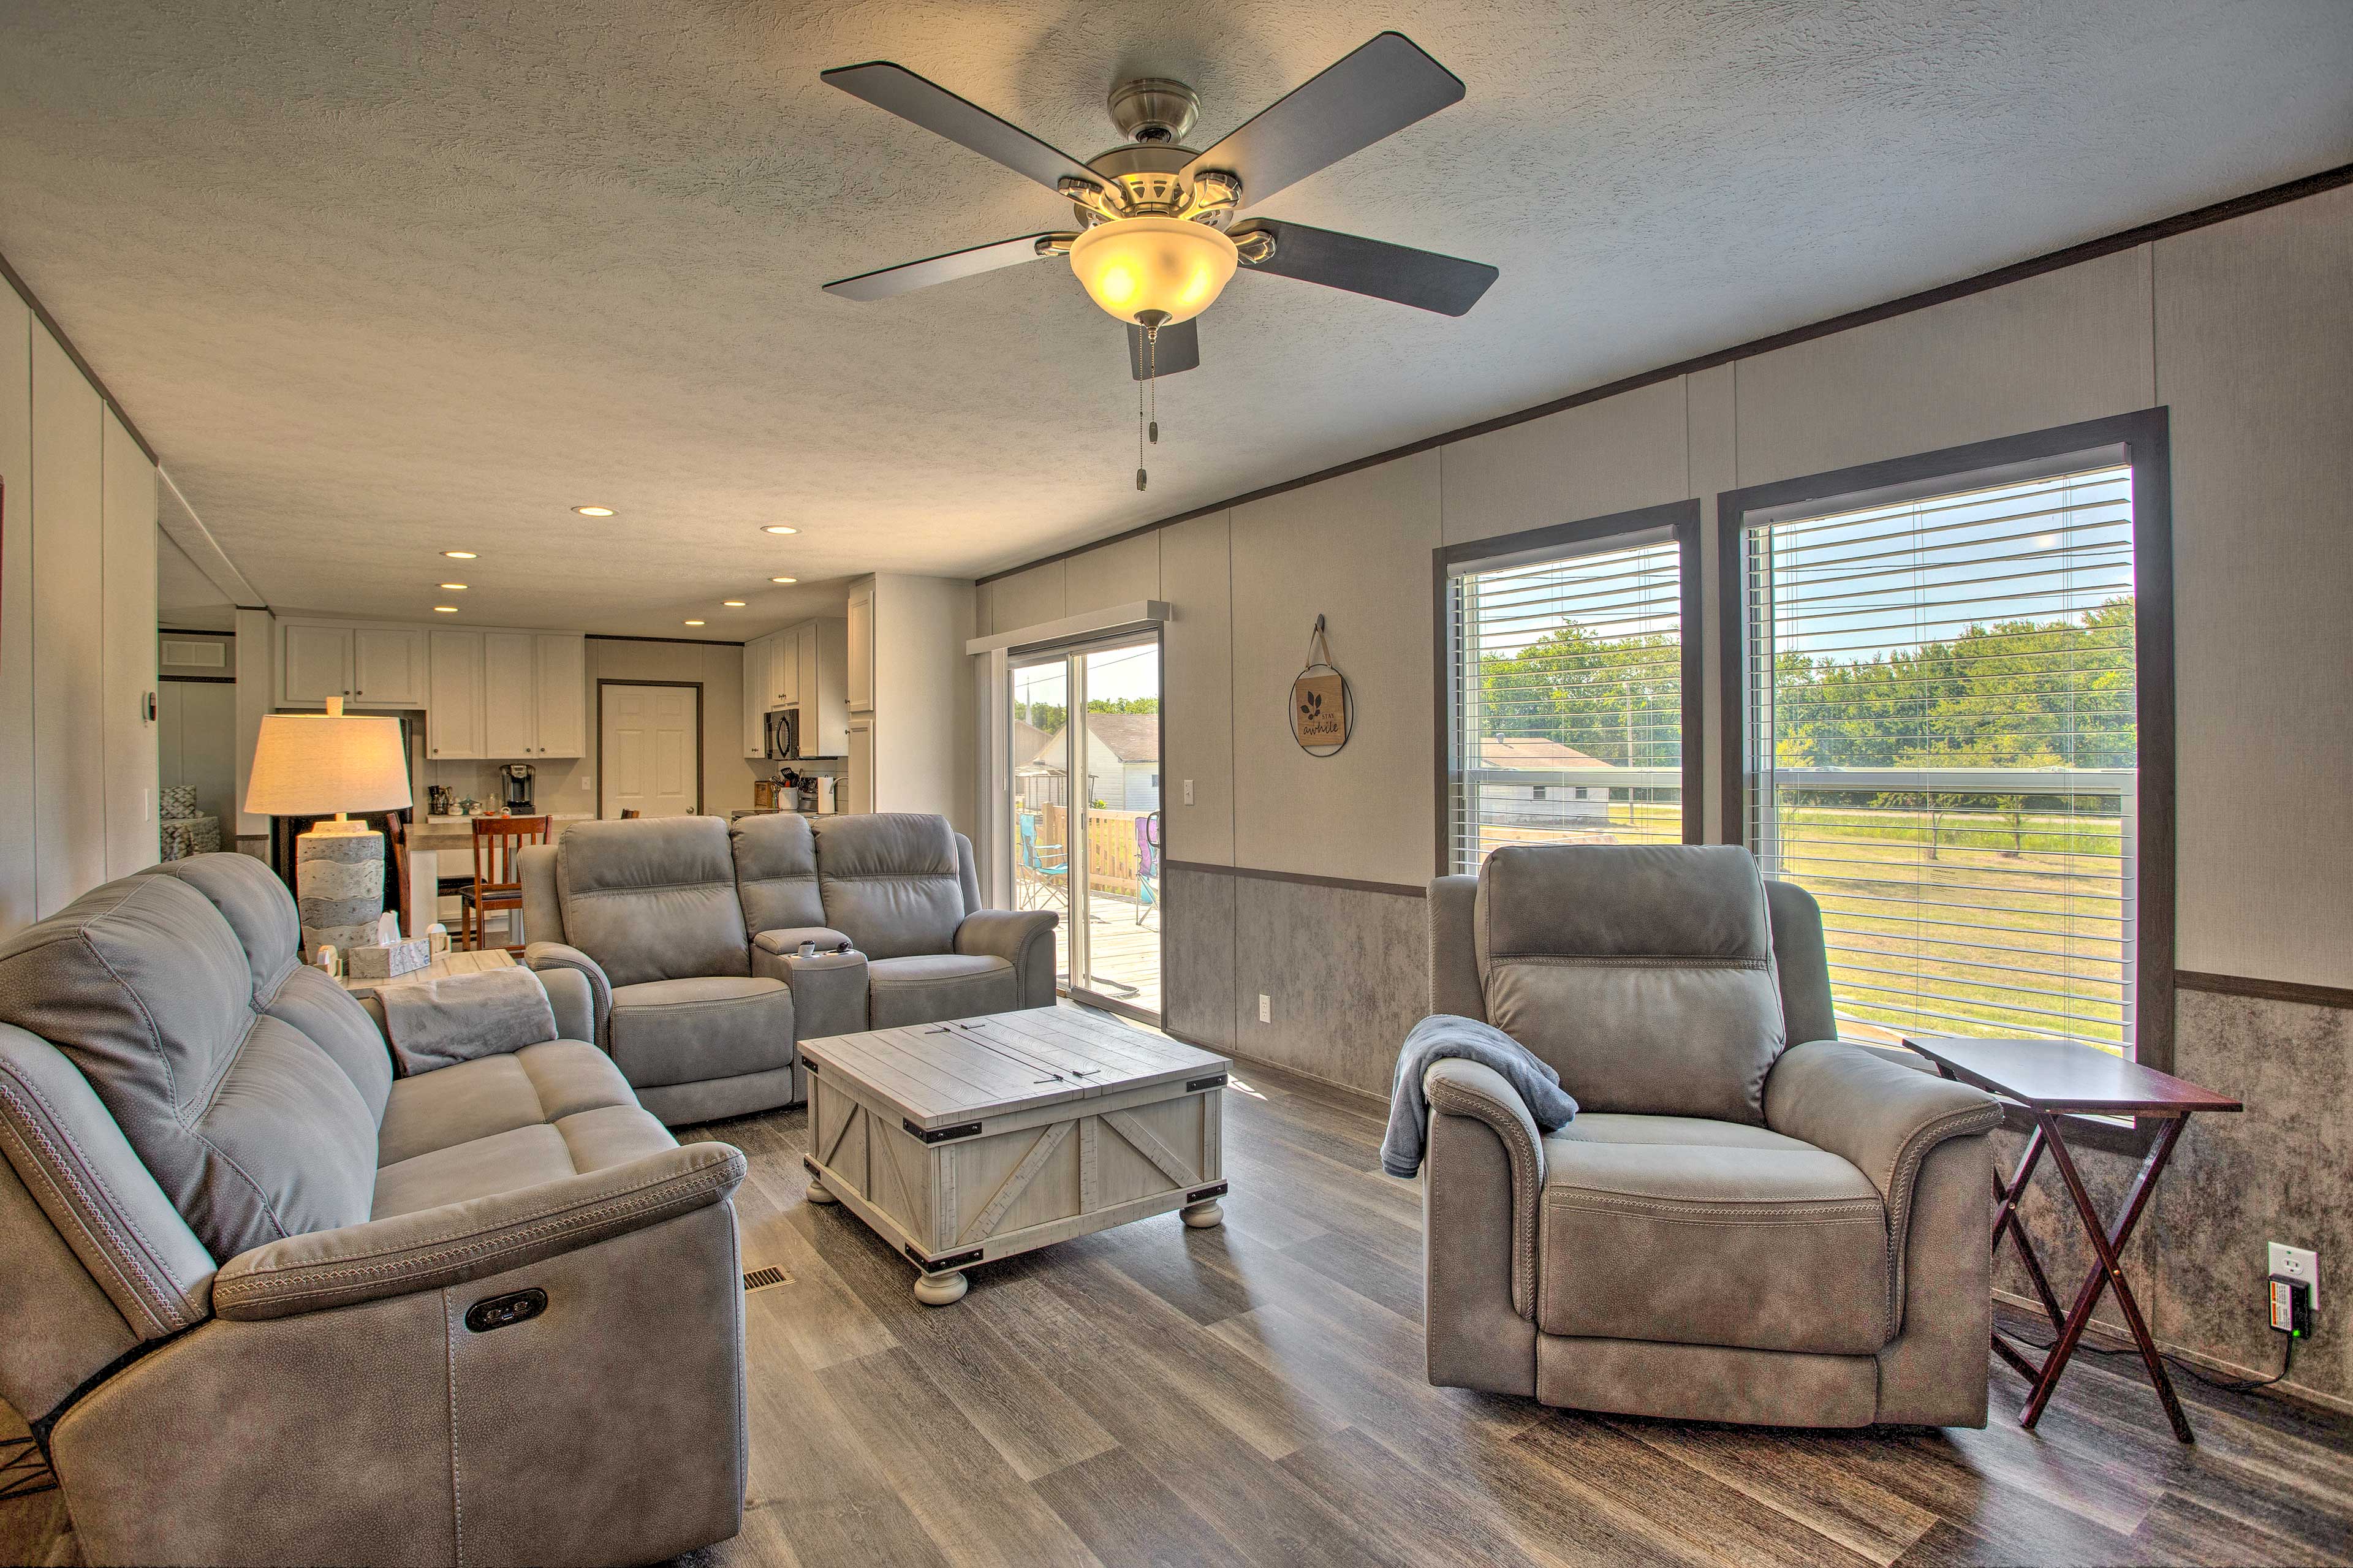 Property Image 2 - Family-Friendly Madill Home: Peaceful Setting